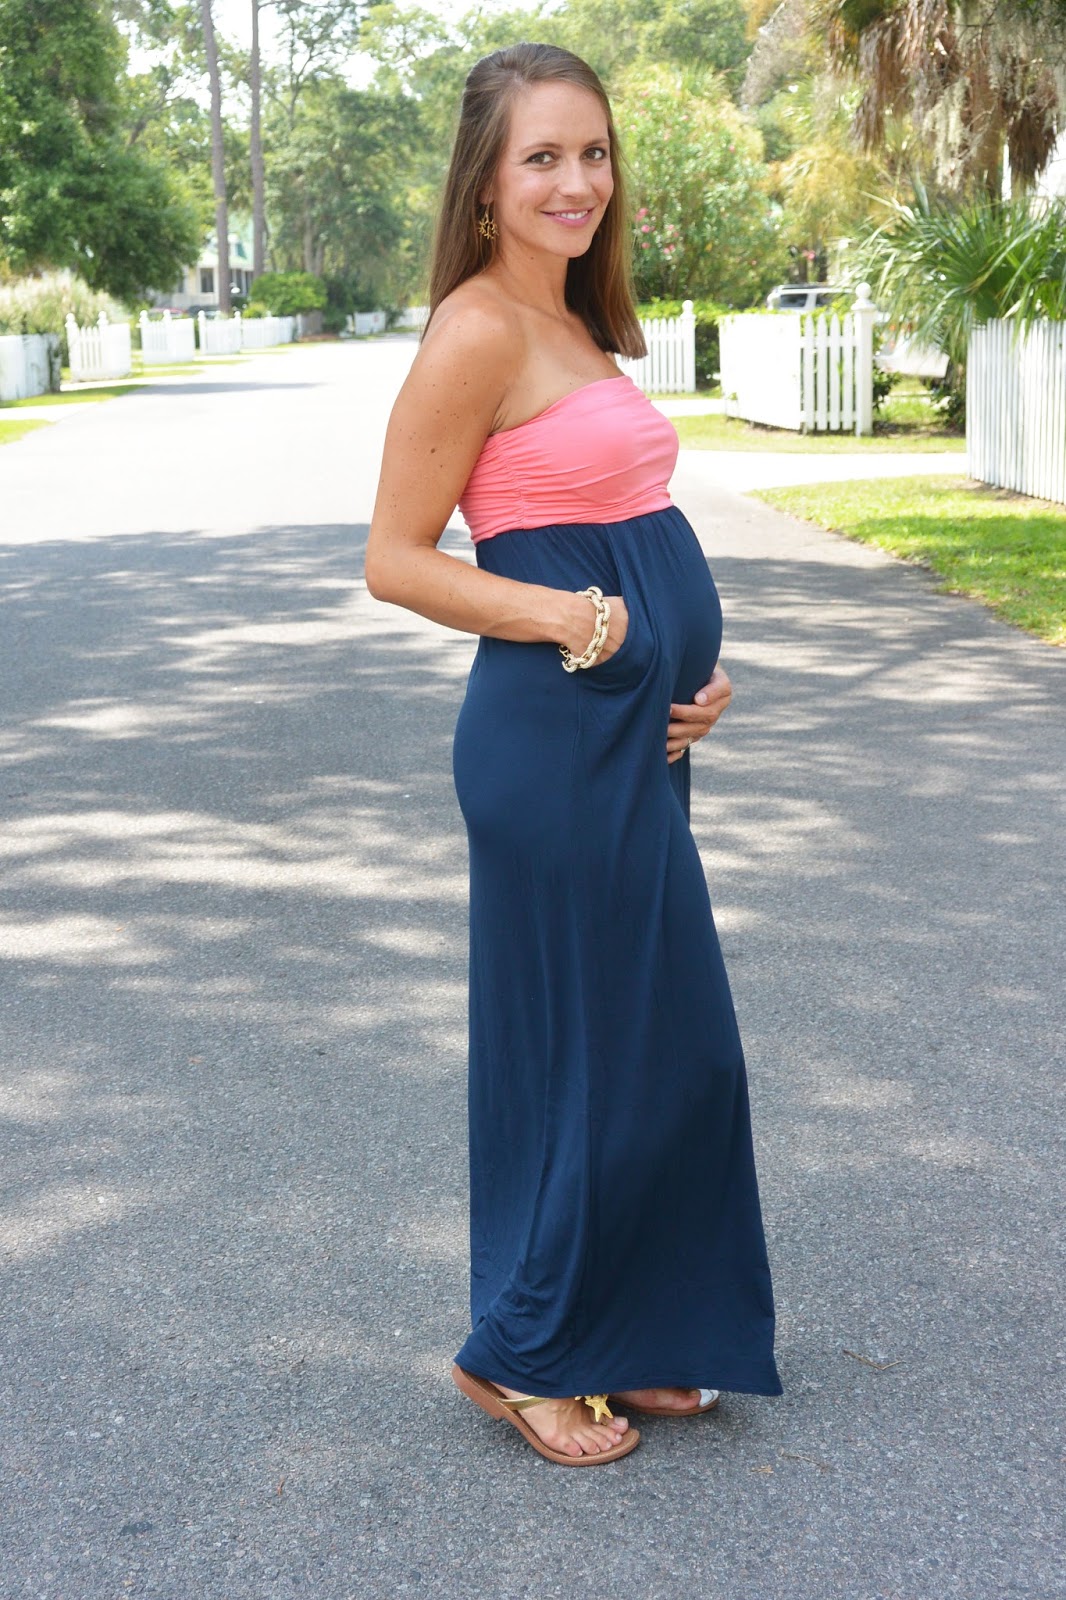 Easy Breezy Maternity Dresses | Stripes and Whimsy